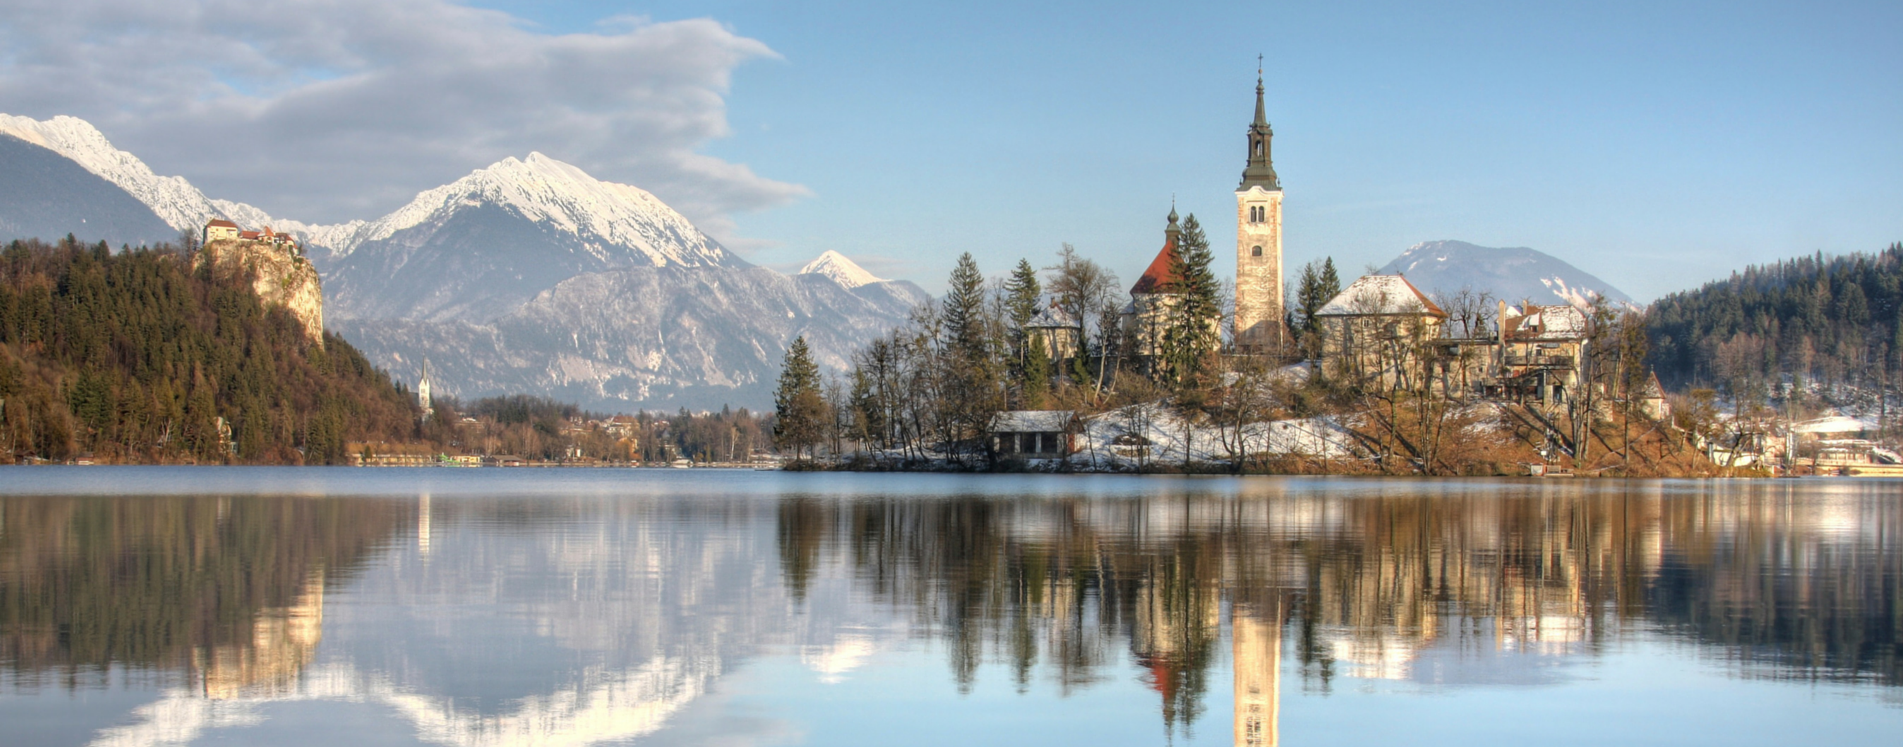 slovenia_cropped_header.png